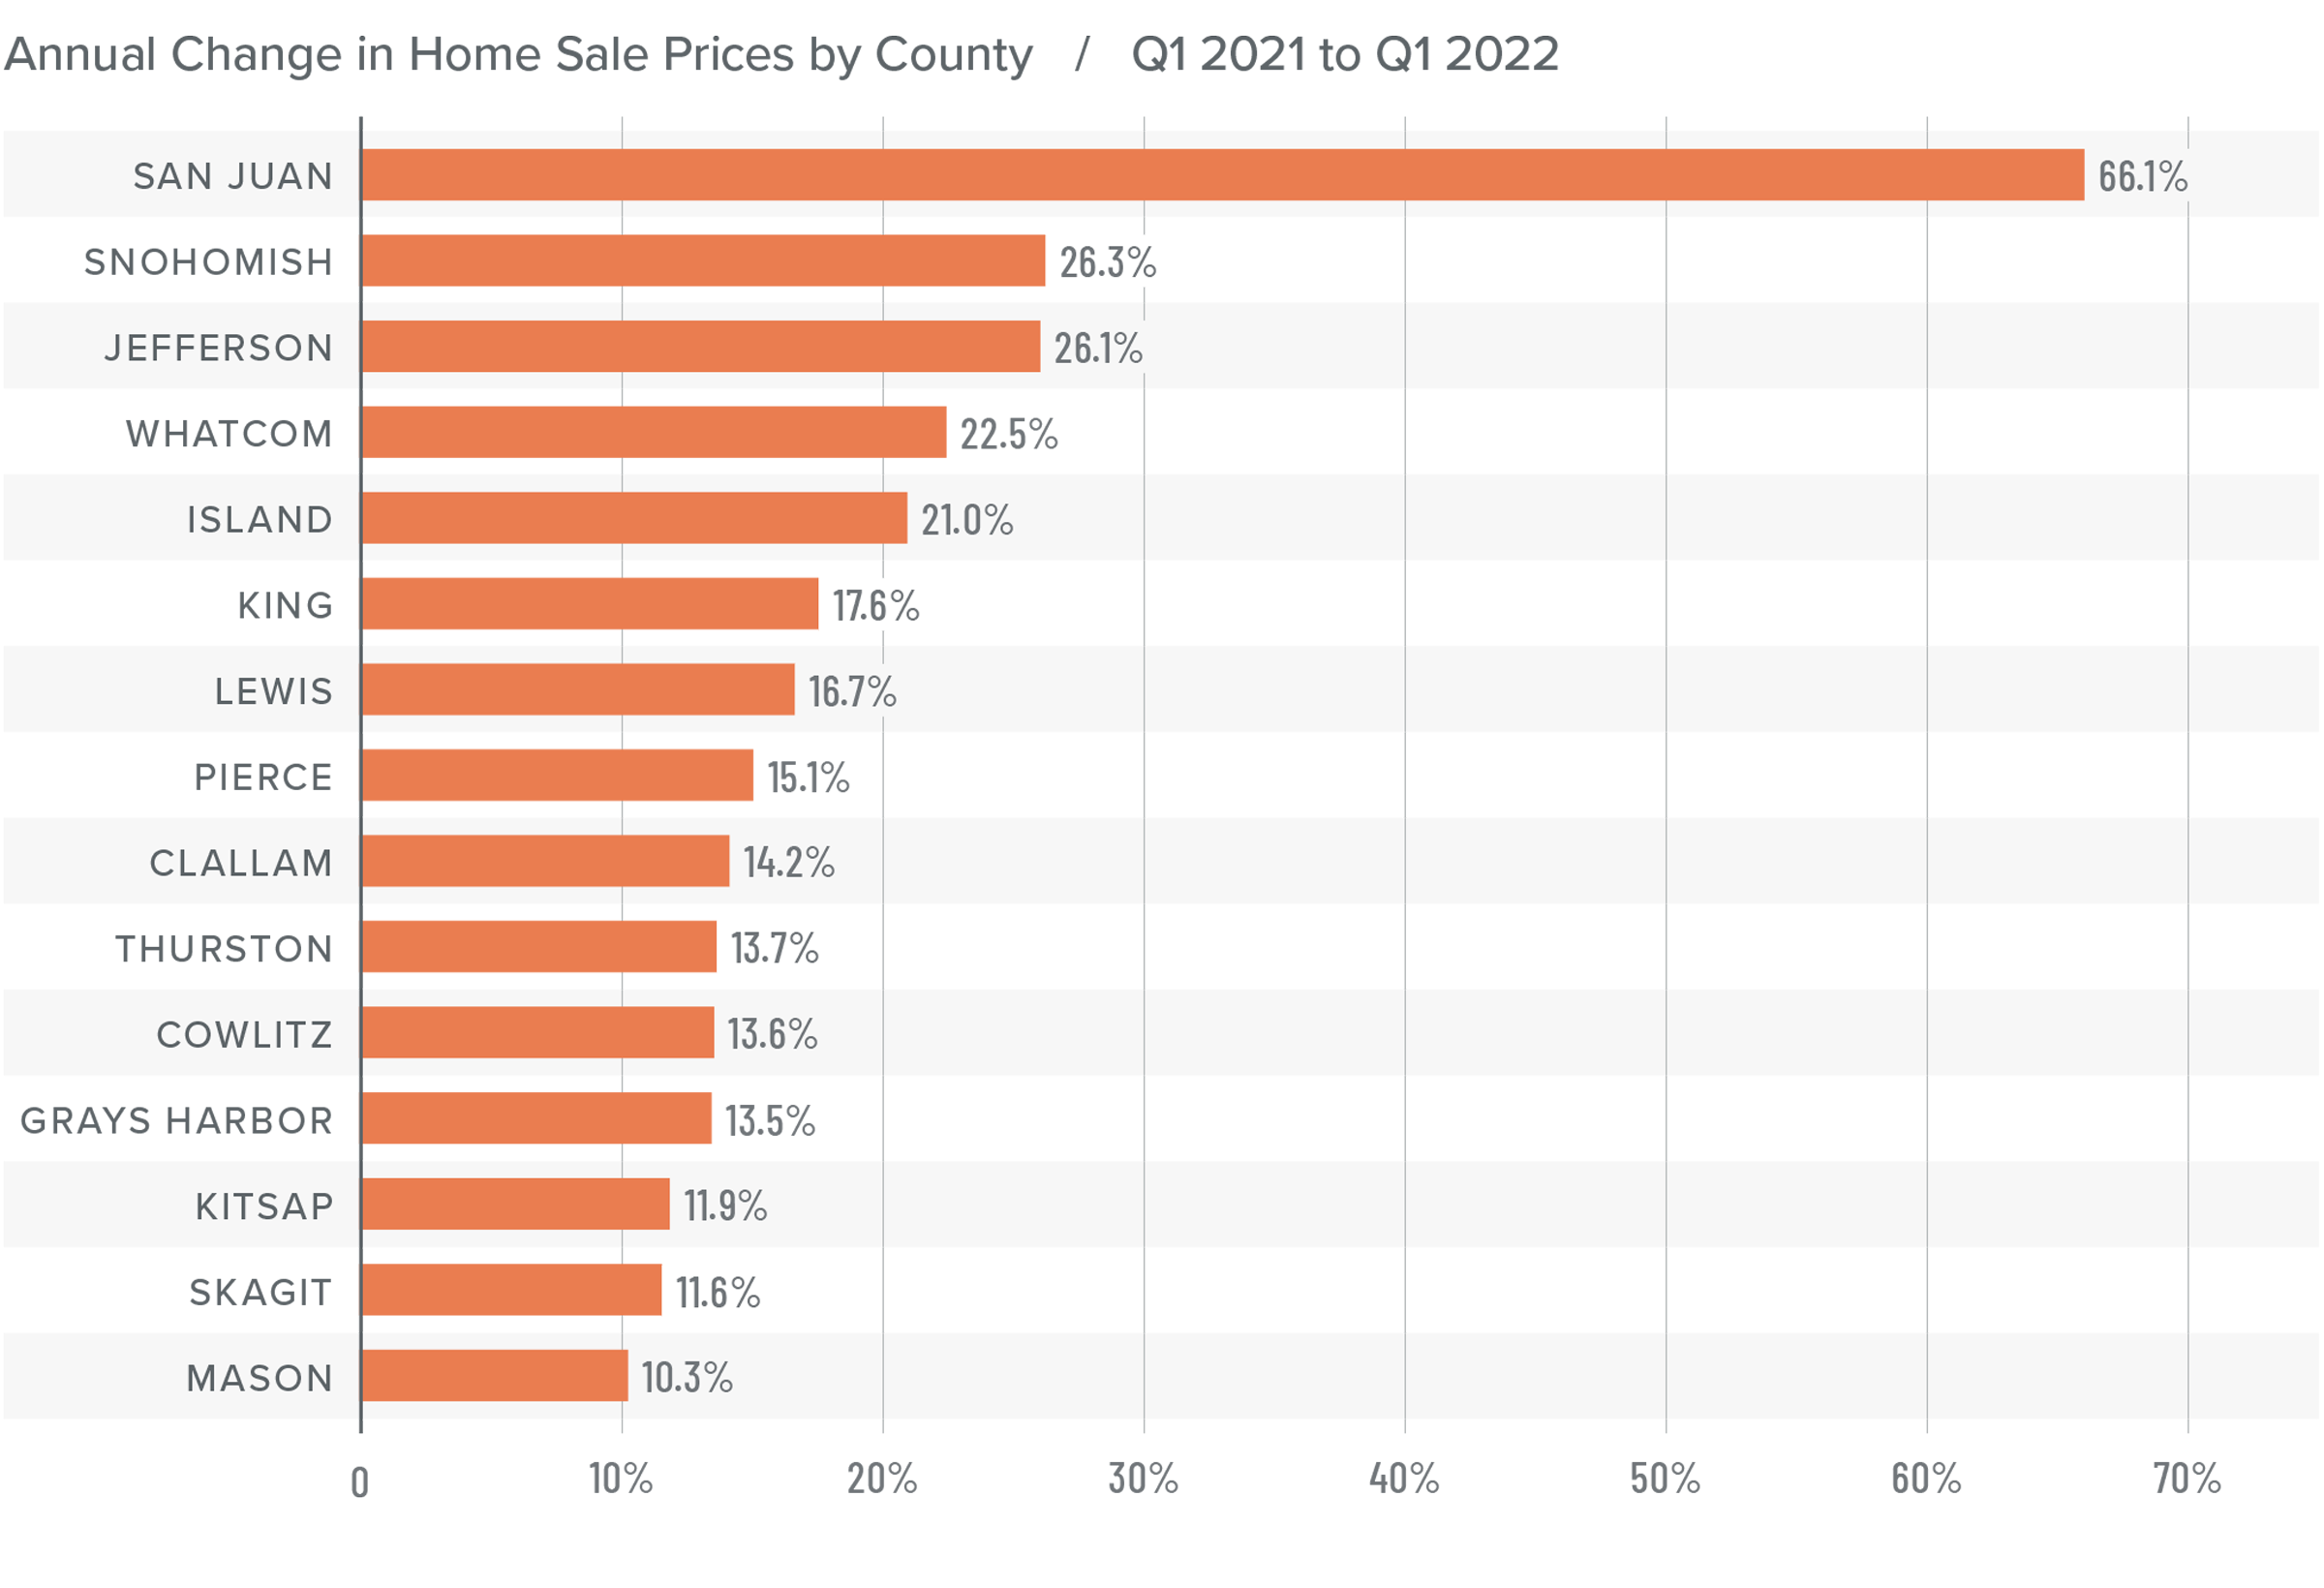 A bar graph showing the annual change in home sale prices for various counties in Western Washington from Q1 2021 to Q1 2022.